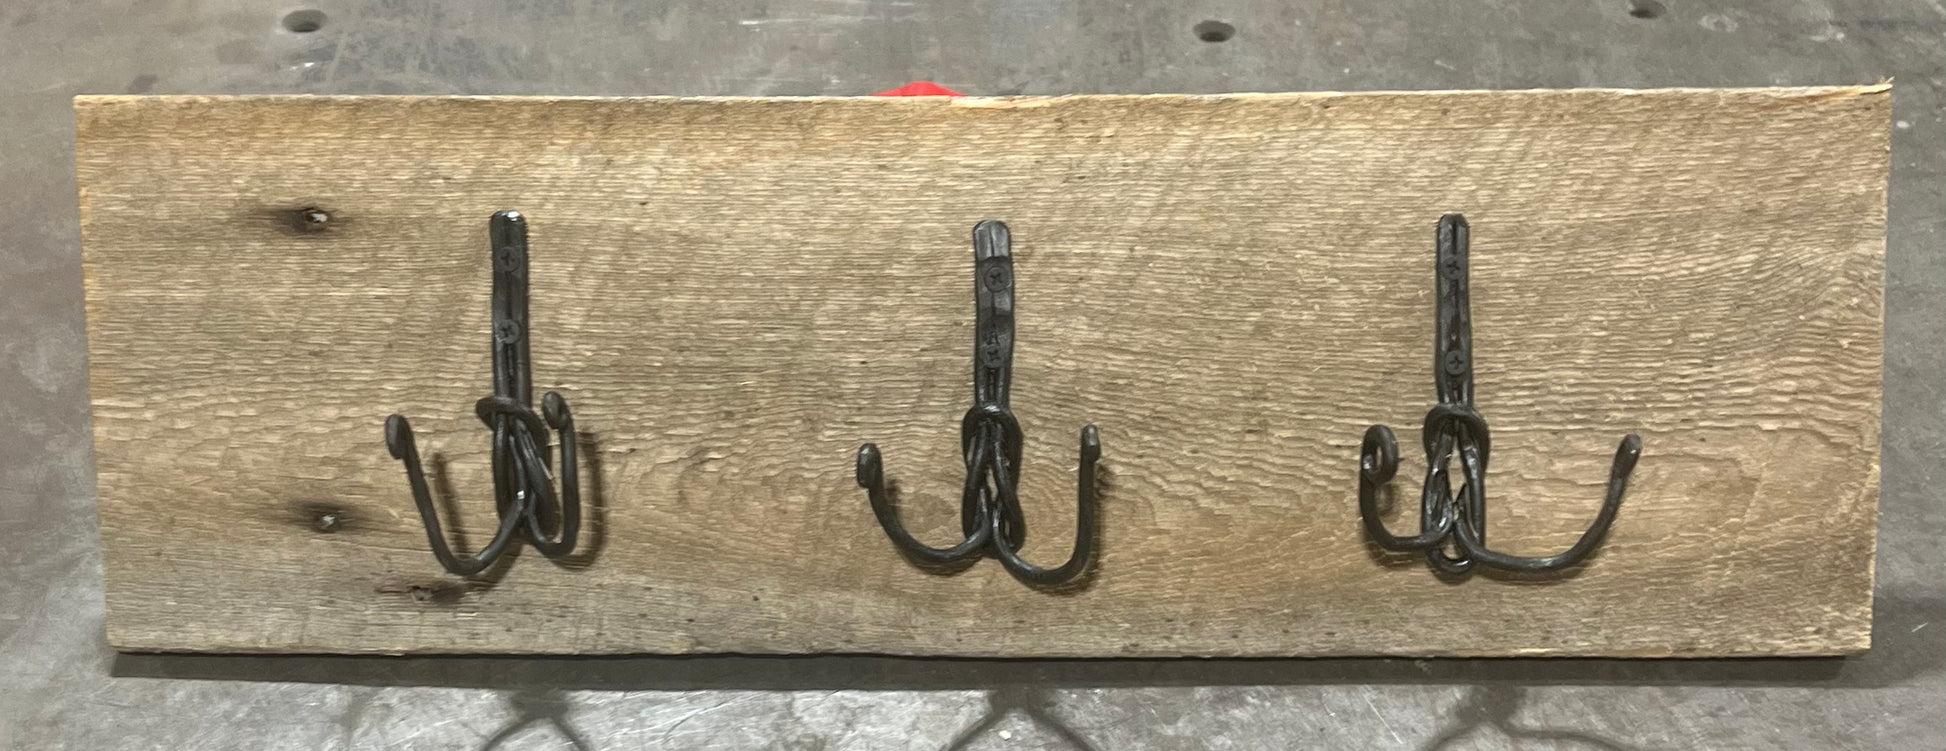 Blacksmith hand forged coat rack with mild steel and barn board